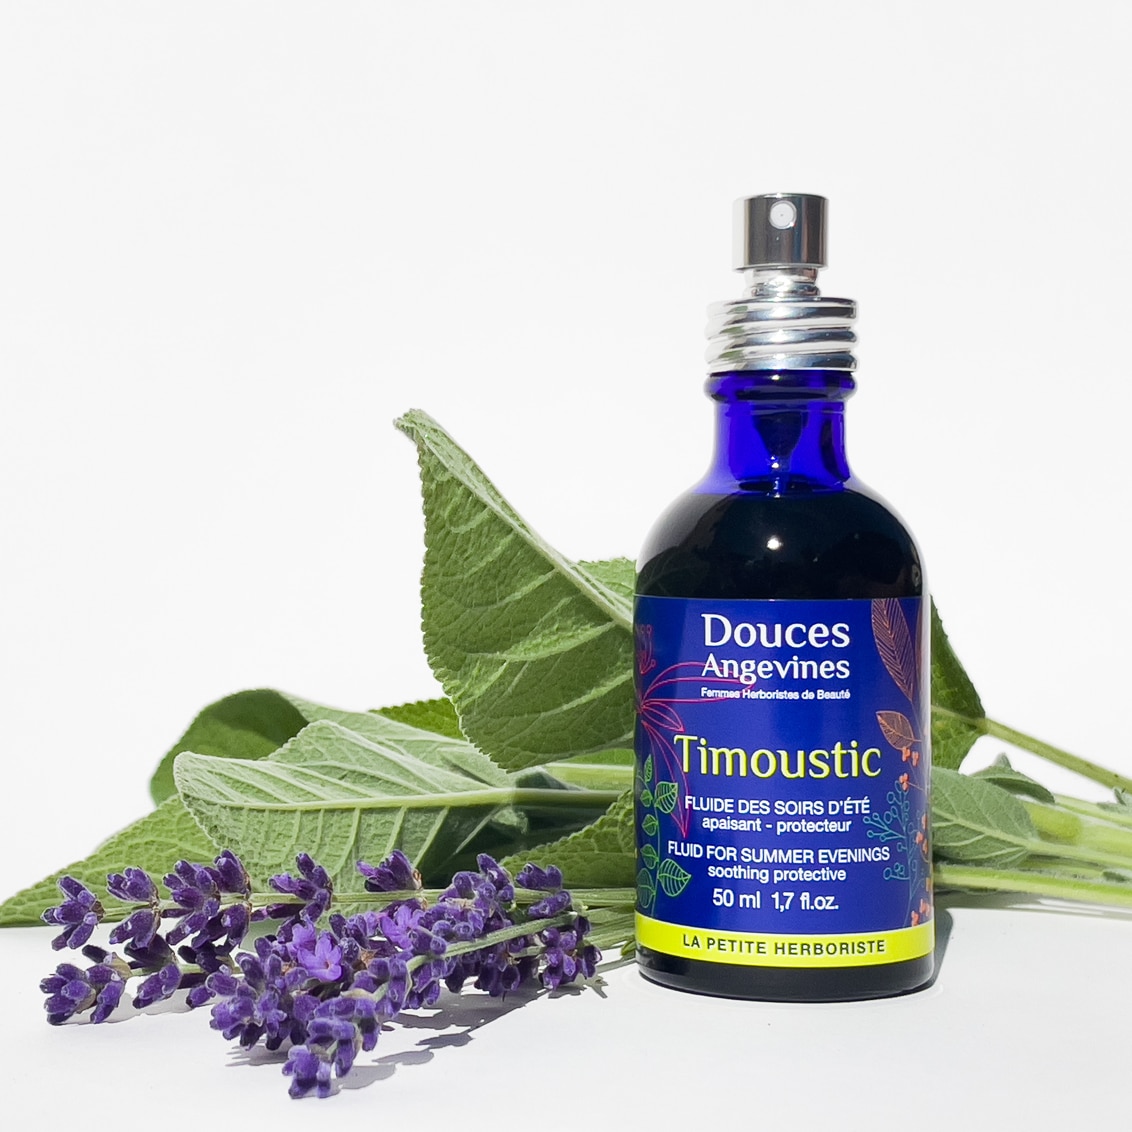 Timoustic lotion apaisante protectrice bio - Douces Angevines